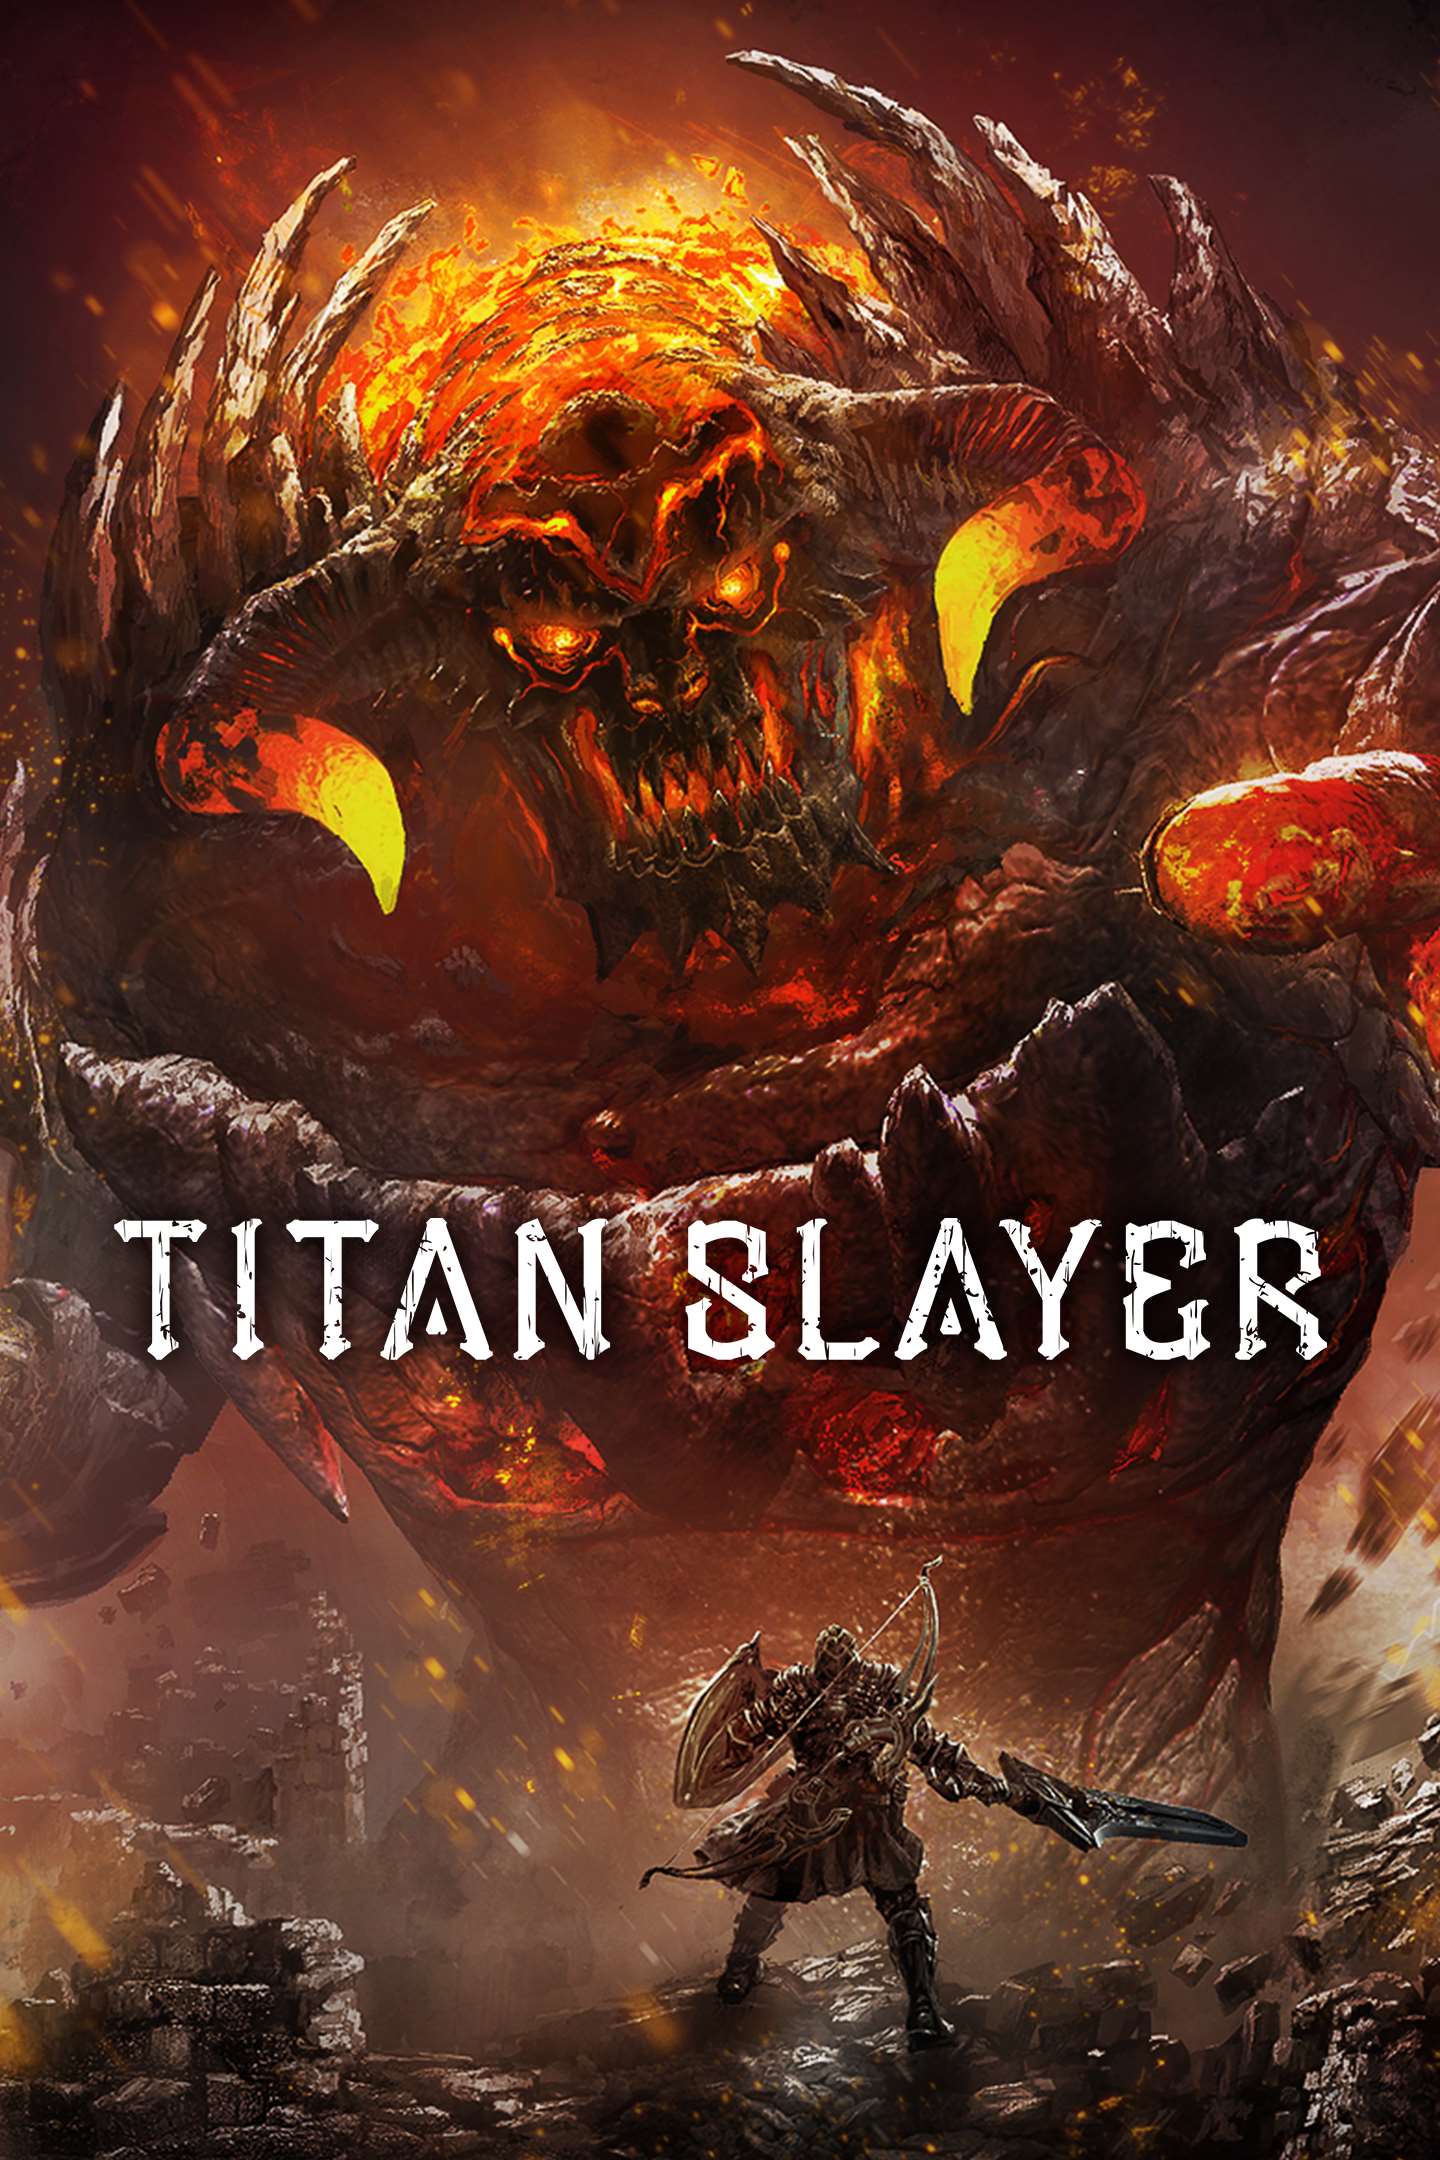 Find the best computers for TITAN SLAYER